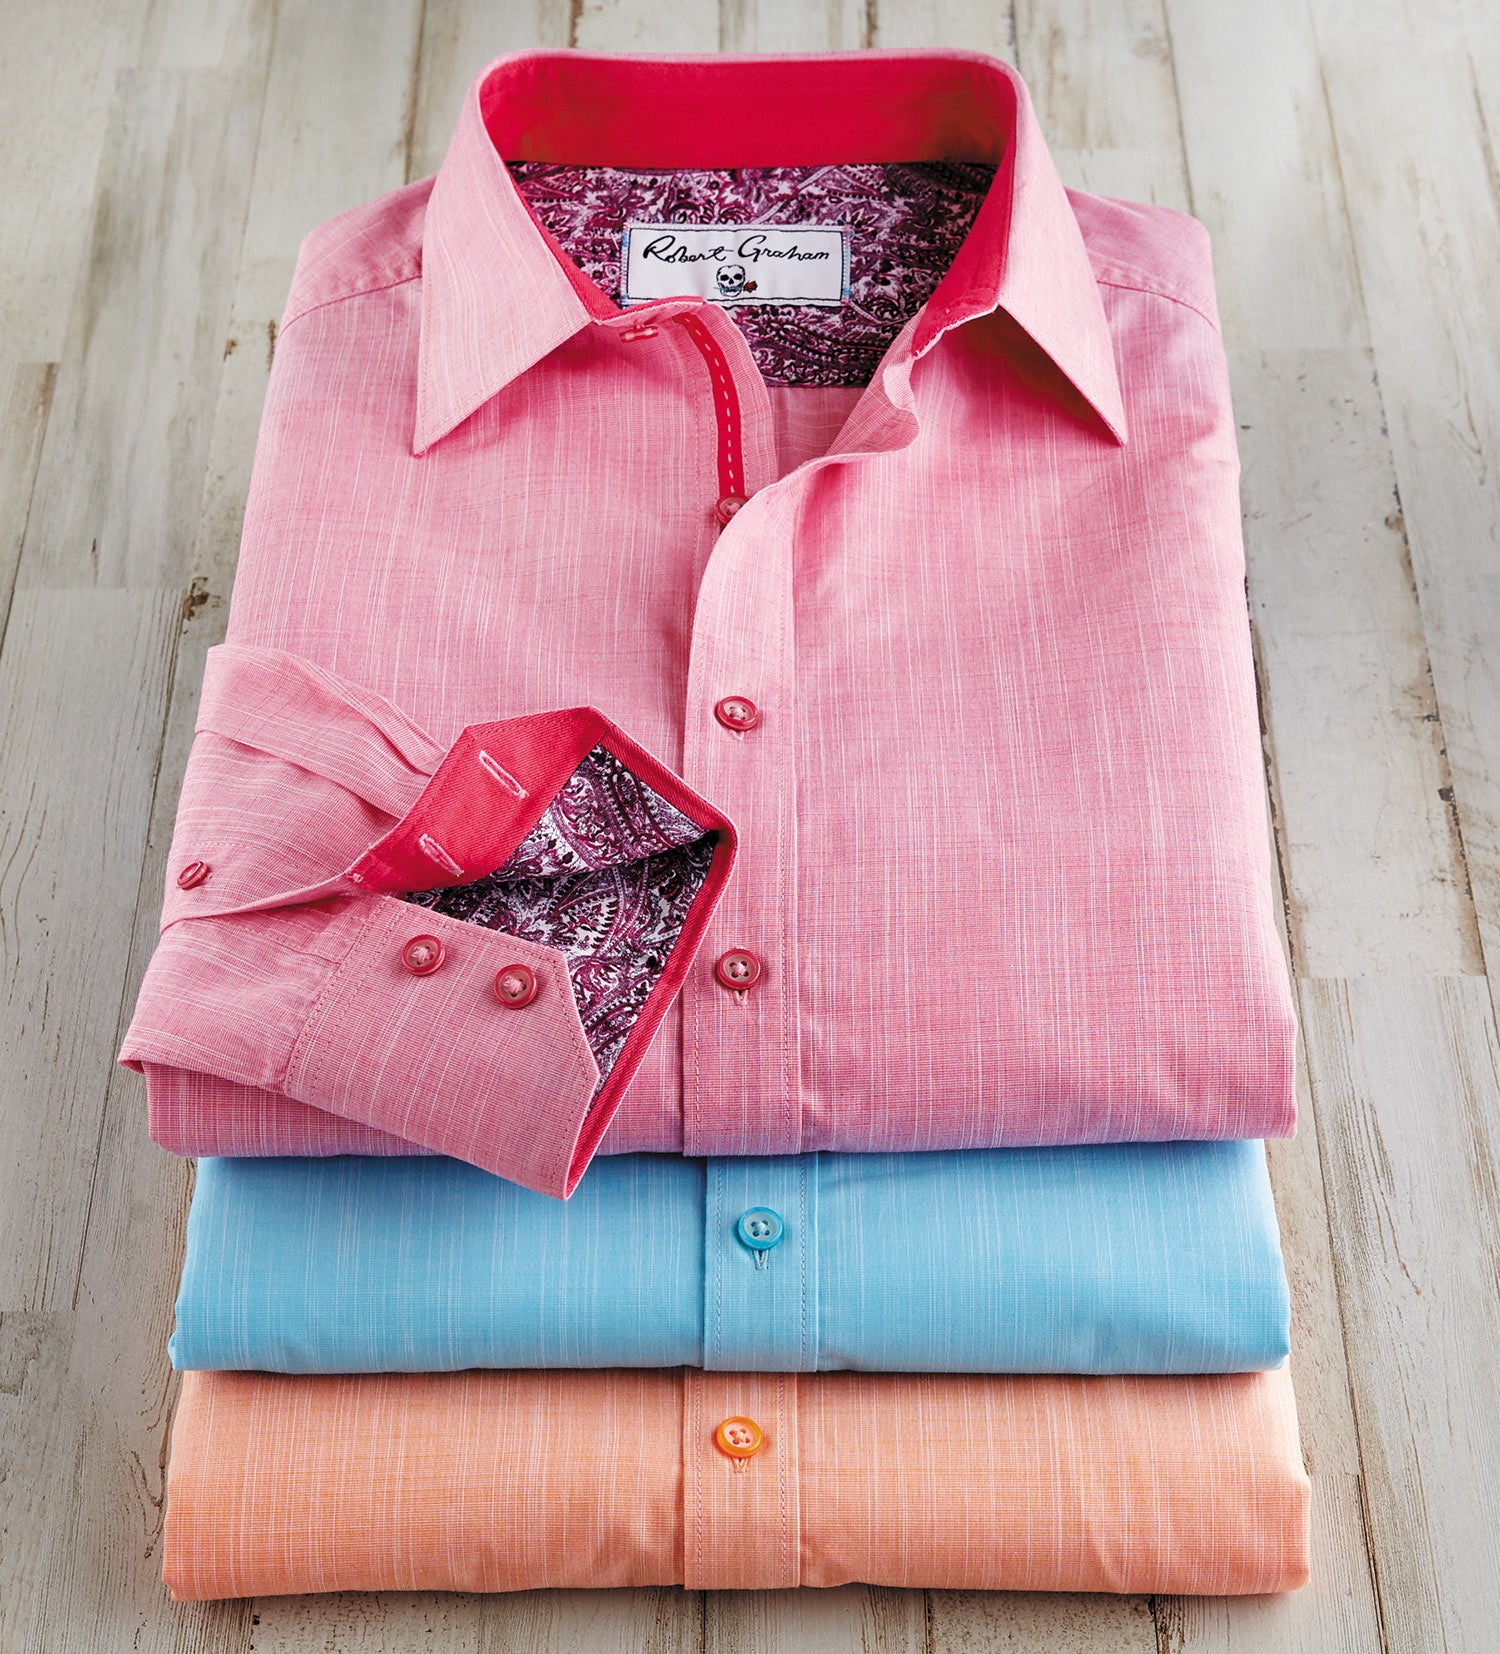 Men's pink fitted dress shirt with large checks and chambray